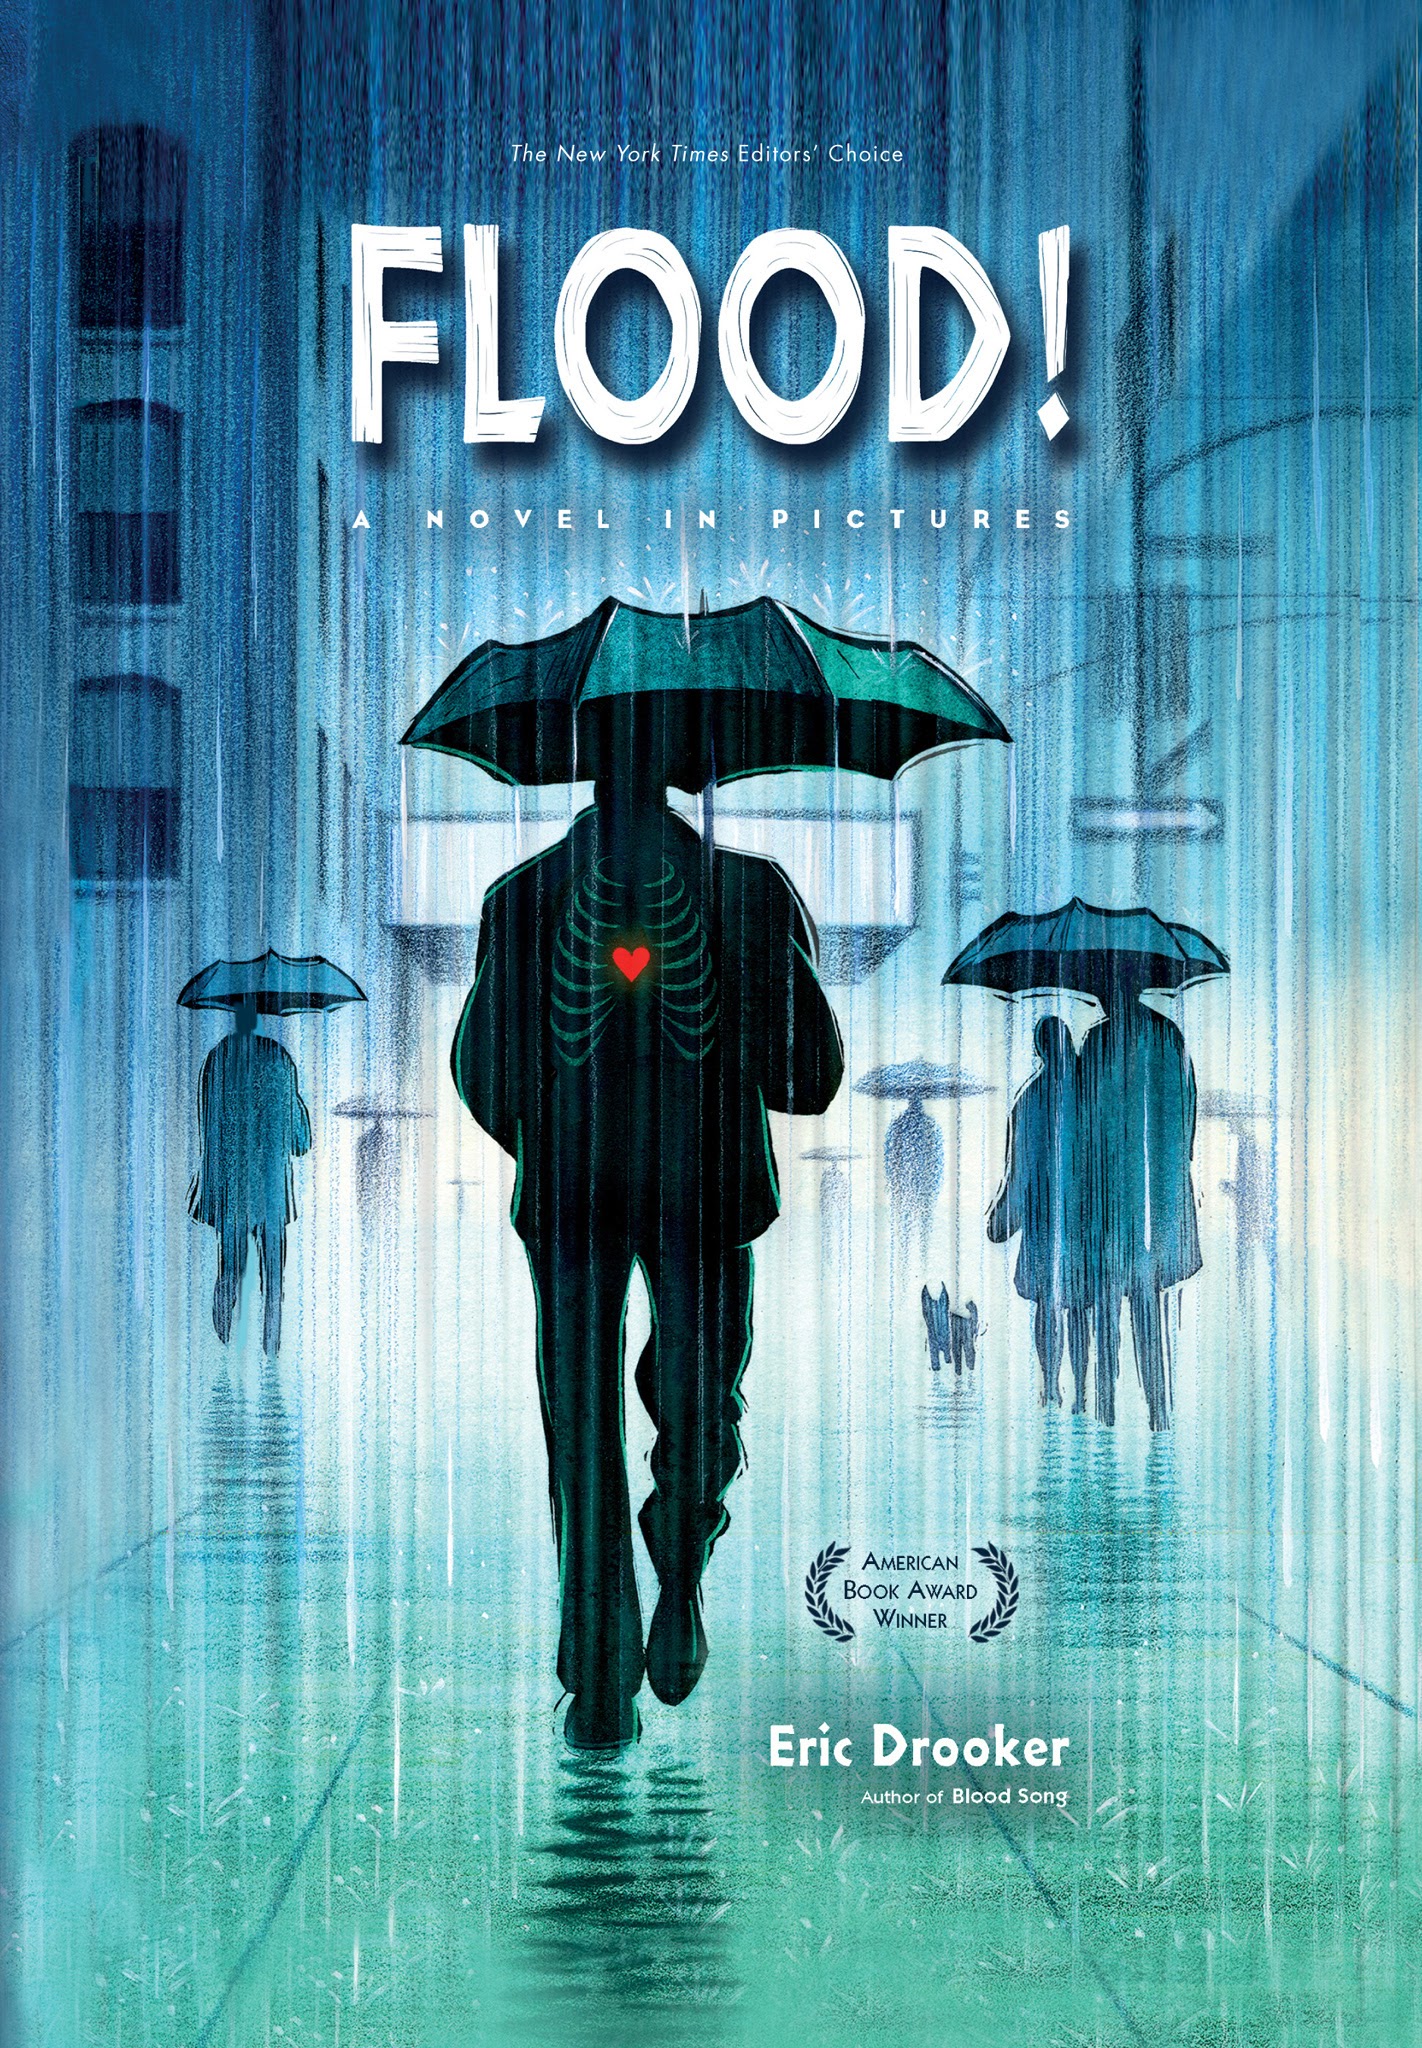 Read online Flood! A Novel in Pictures comic -  Issue # TPB (Part 1) - 1